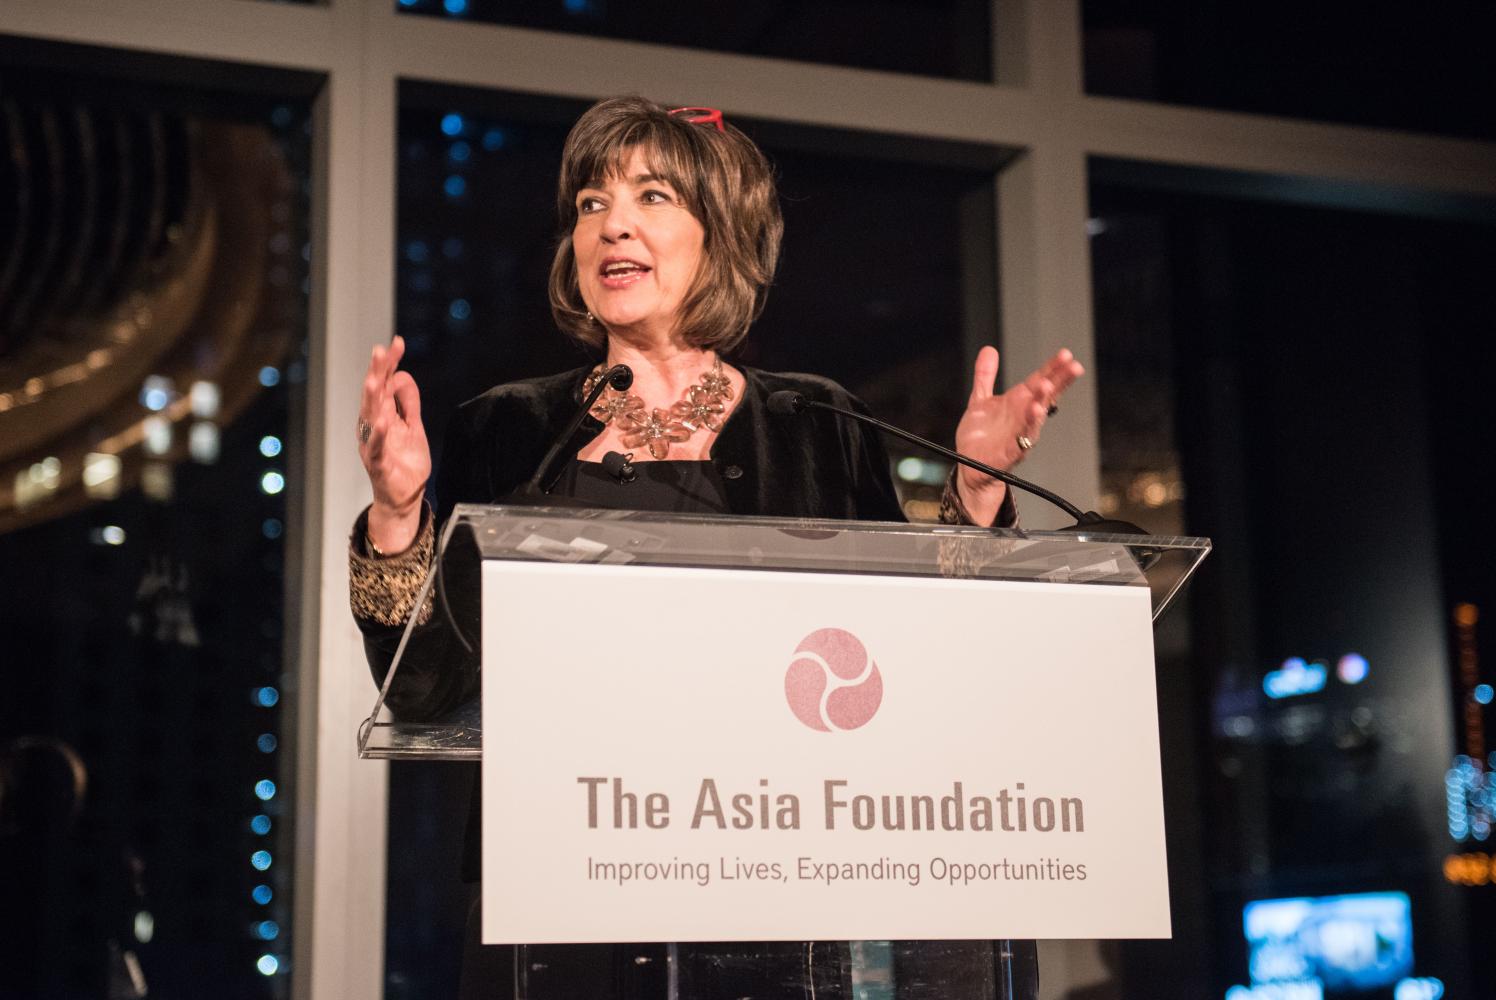 Honoree Christiane Amanpour adresses the crowd